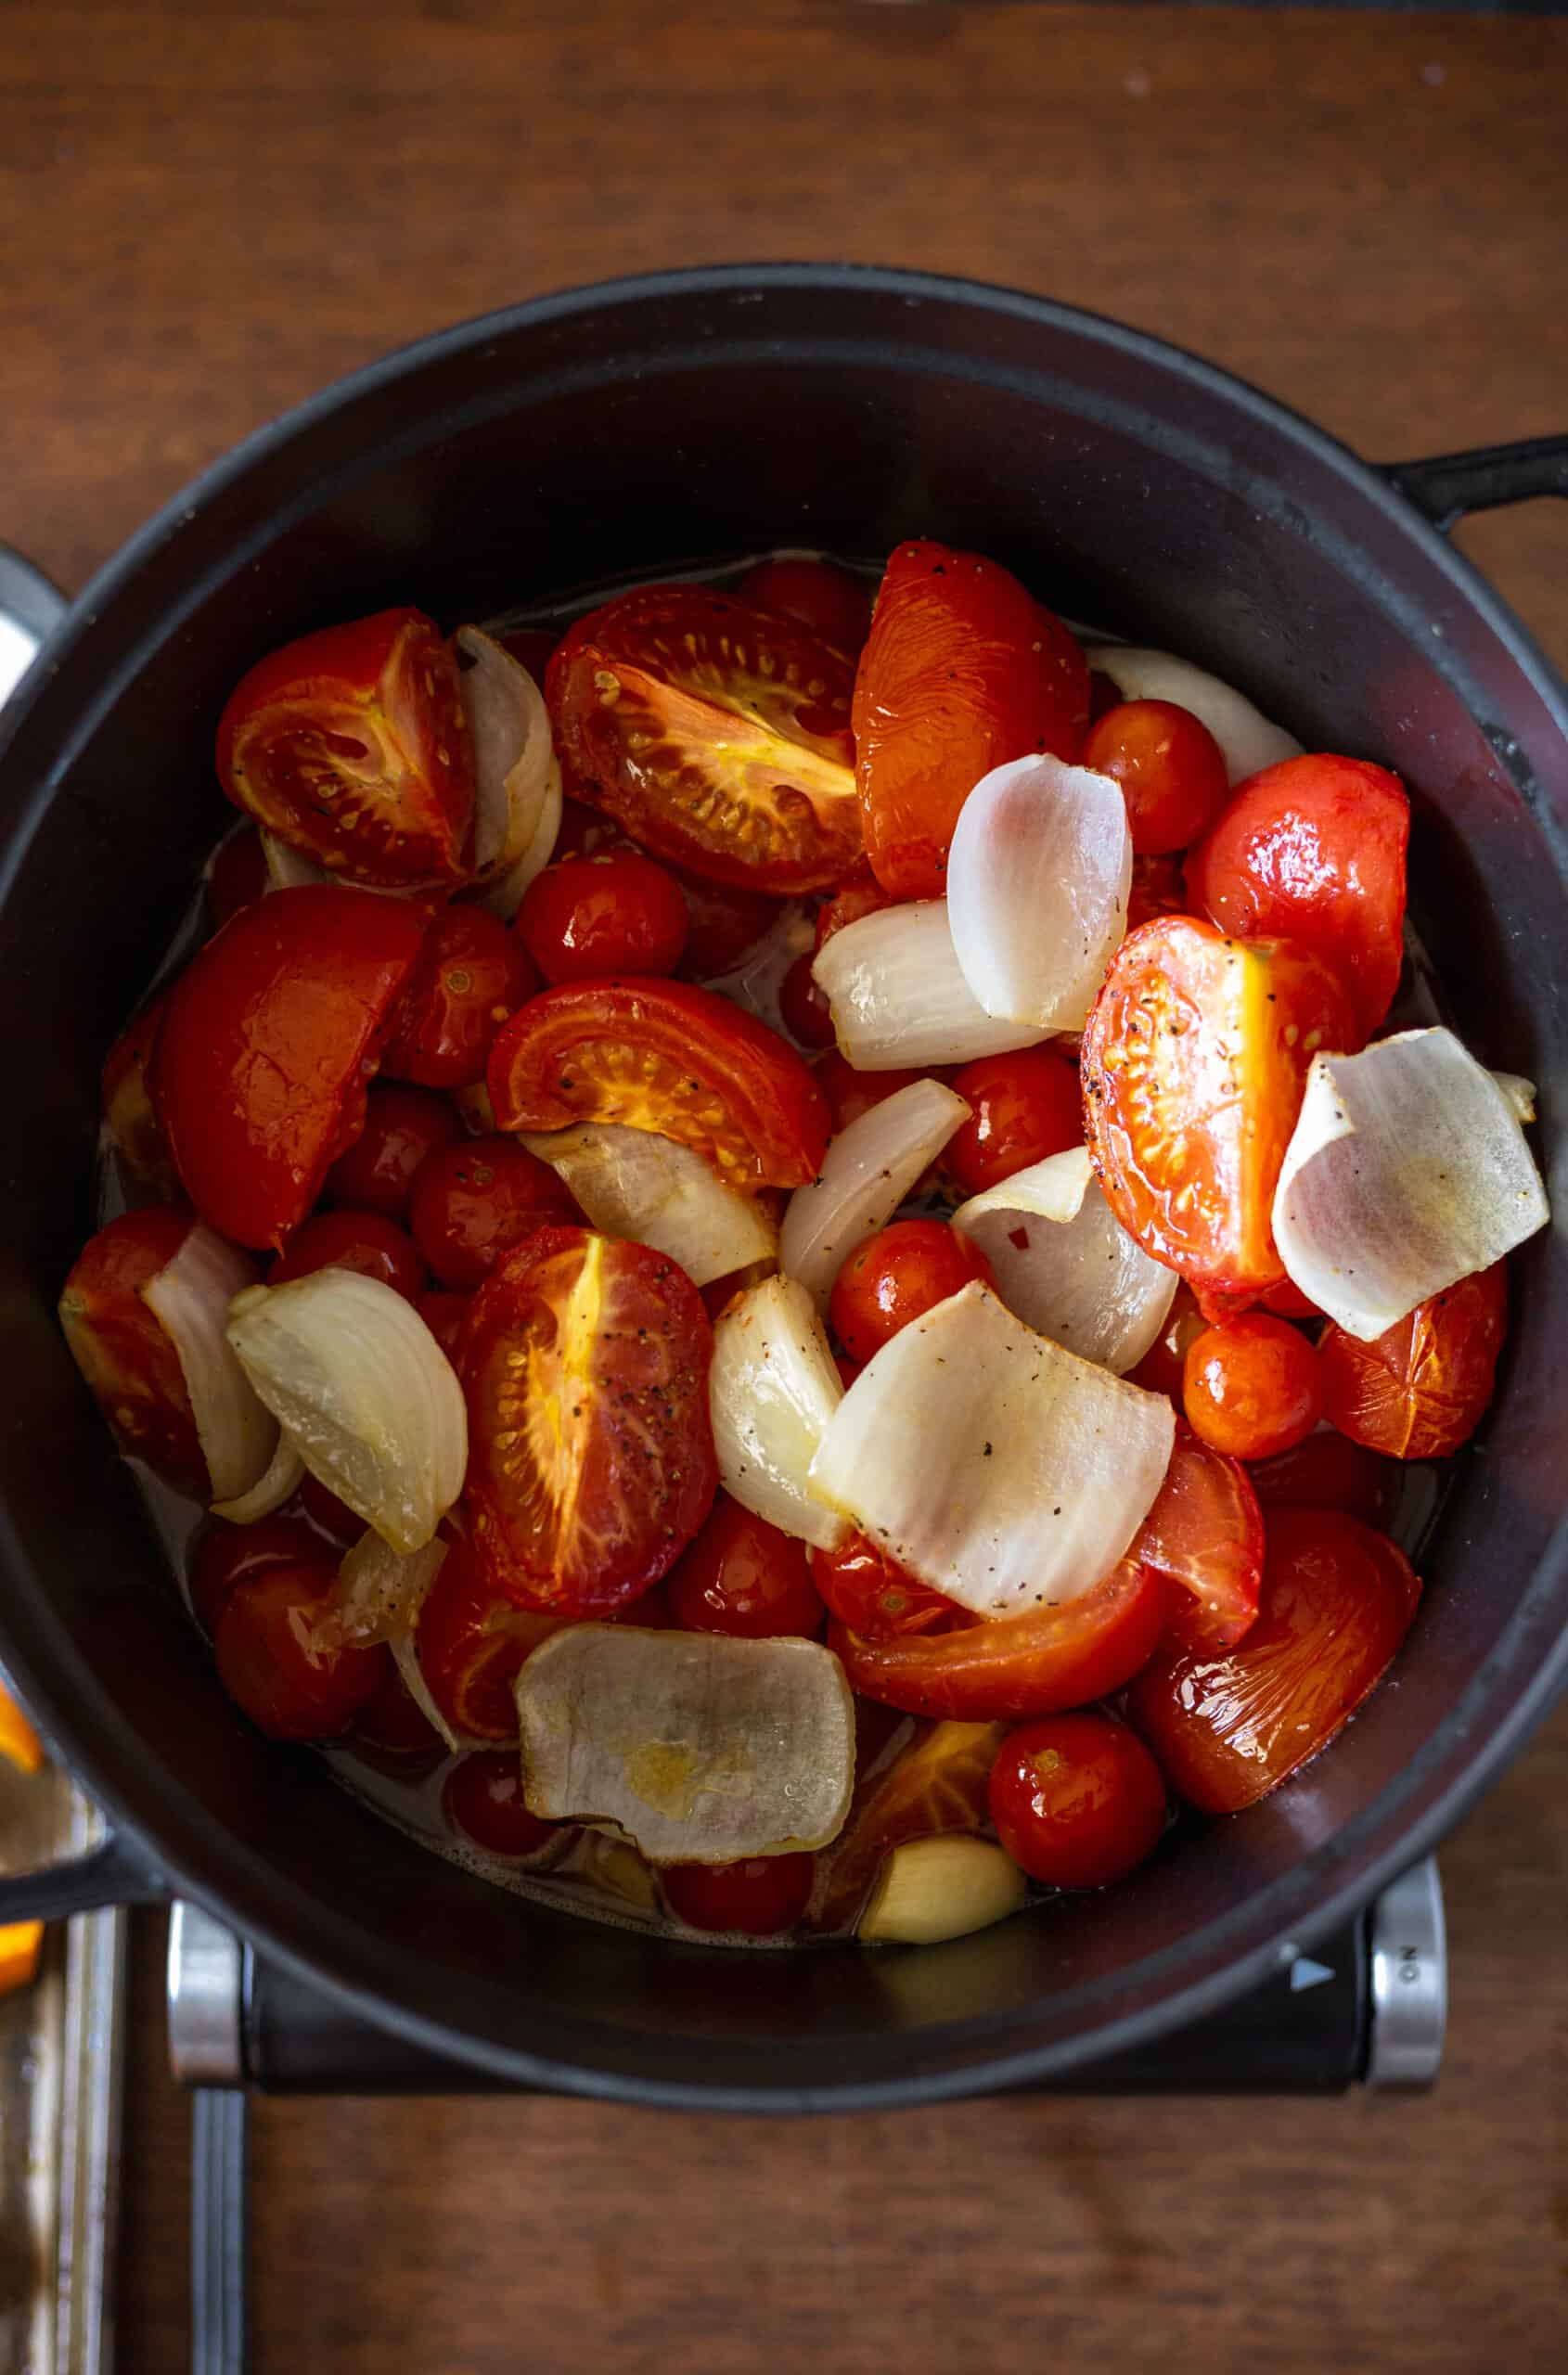 Roasted vegetables in large dutch oven